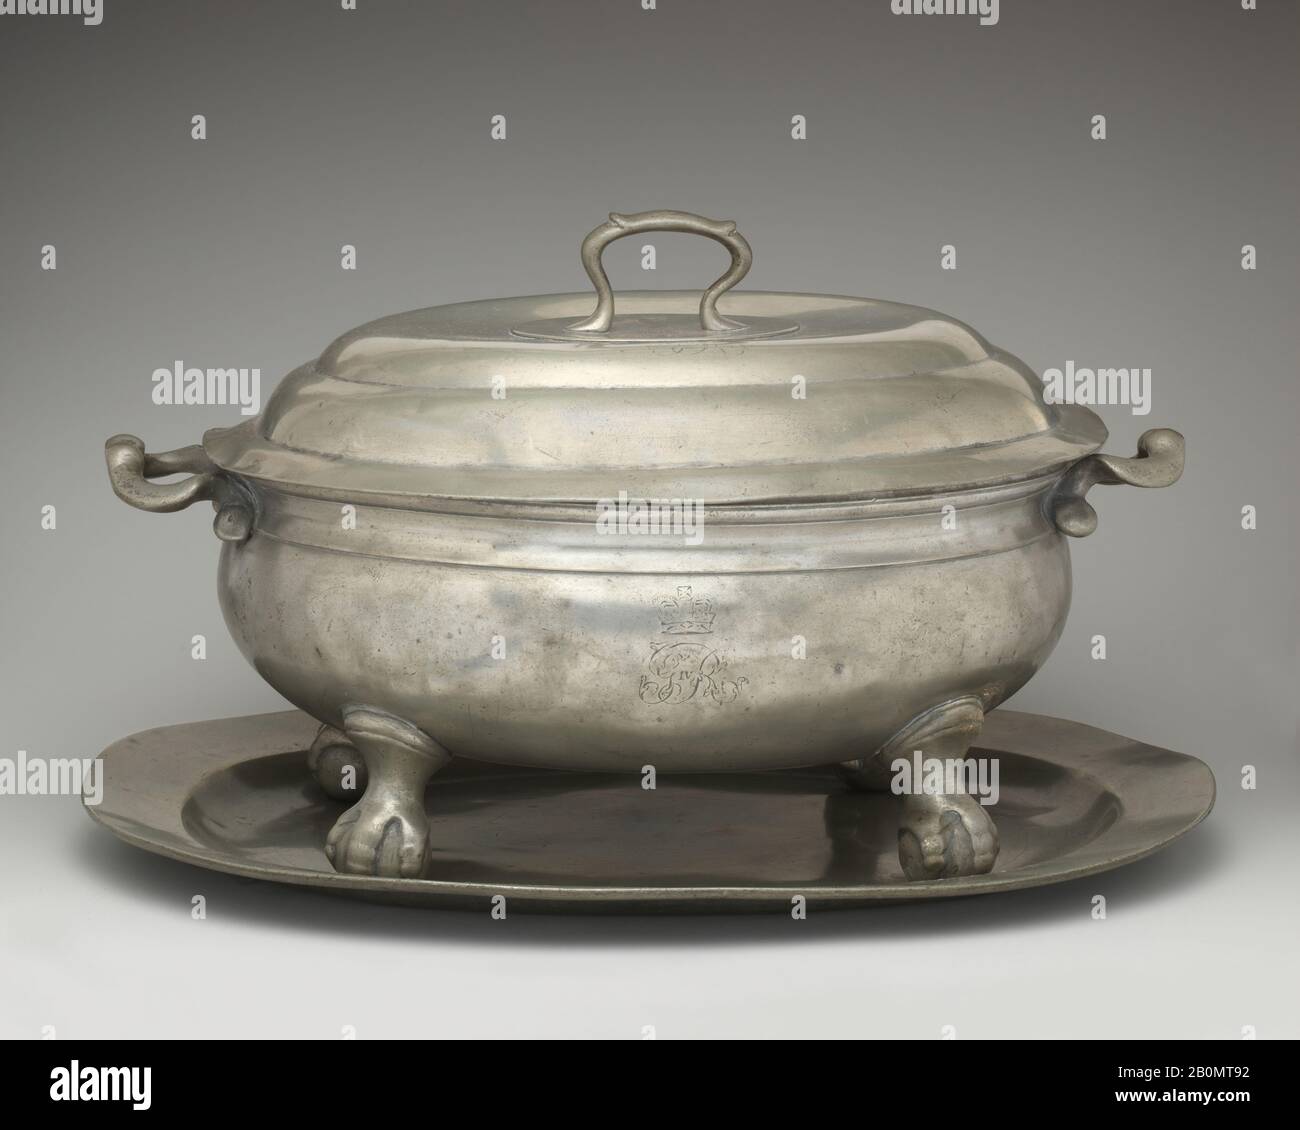 Thomas Alderson, Tureen with cover and tray, British, London, Thomas Alderson (ca. 1790–1825), 1820, British, London, Pewter, Overall (tureen with cover .1a, b): 9 × 15 in. (22.9 × 38.1 cm), Overall (tray .2): 16 × 12 1/2 in. (40.6 × 31.8 cm), Metalwork-Pewter Stock Photo